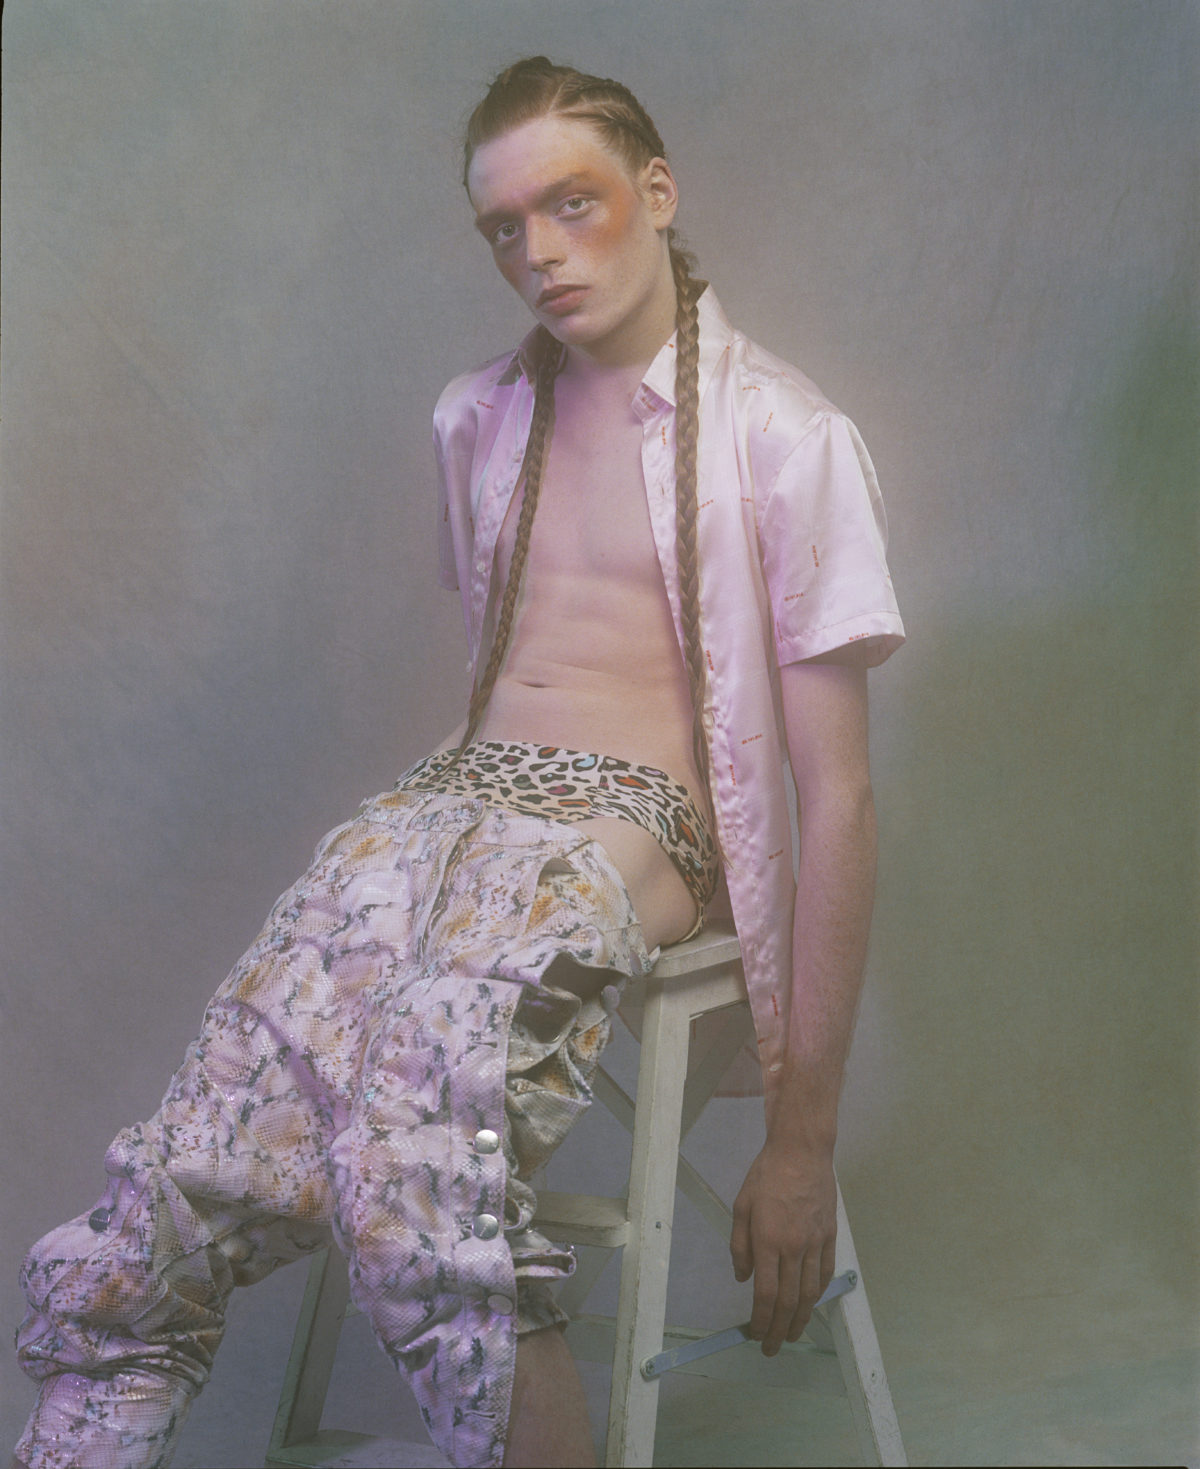 A PART PARUTIONS #2 (c) Alexandre Haefeli styled by Arthur Mayadoux with Icosae, Neith Nyer & Lucien Pellat Finet